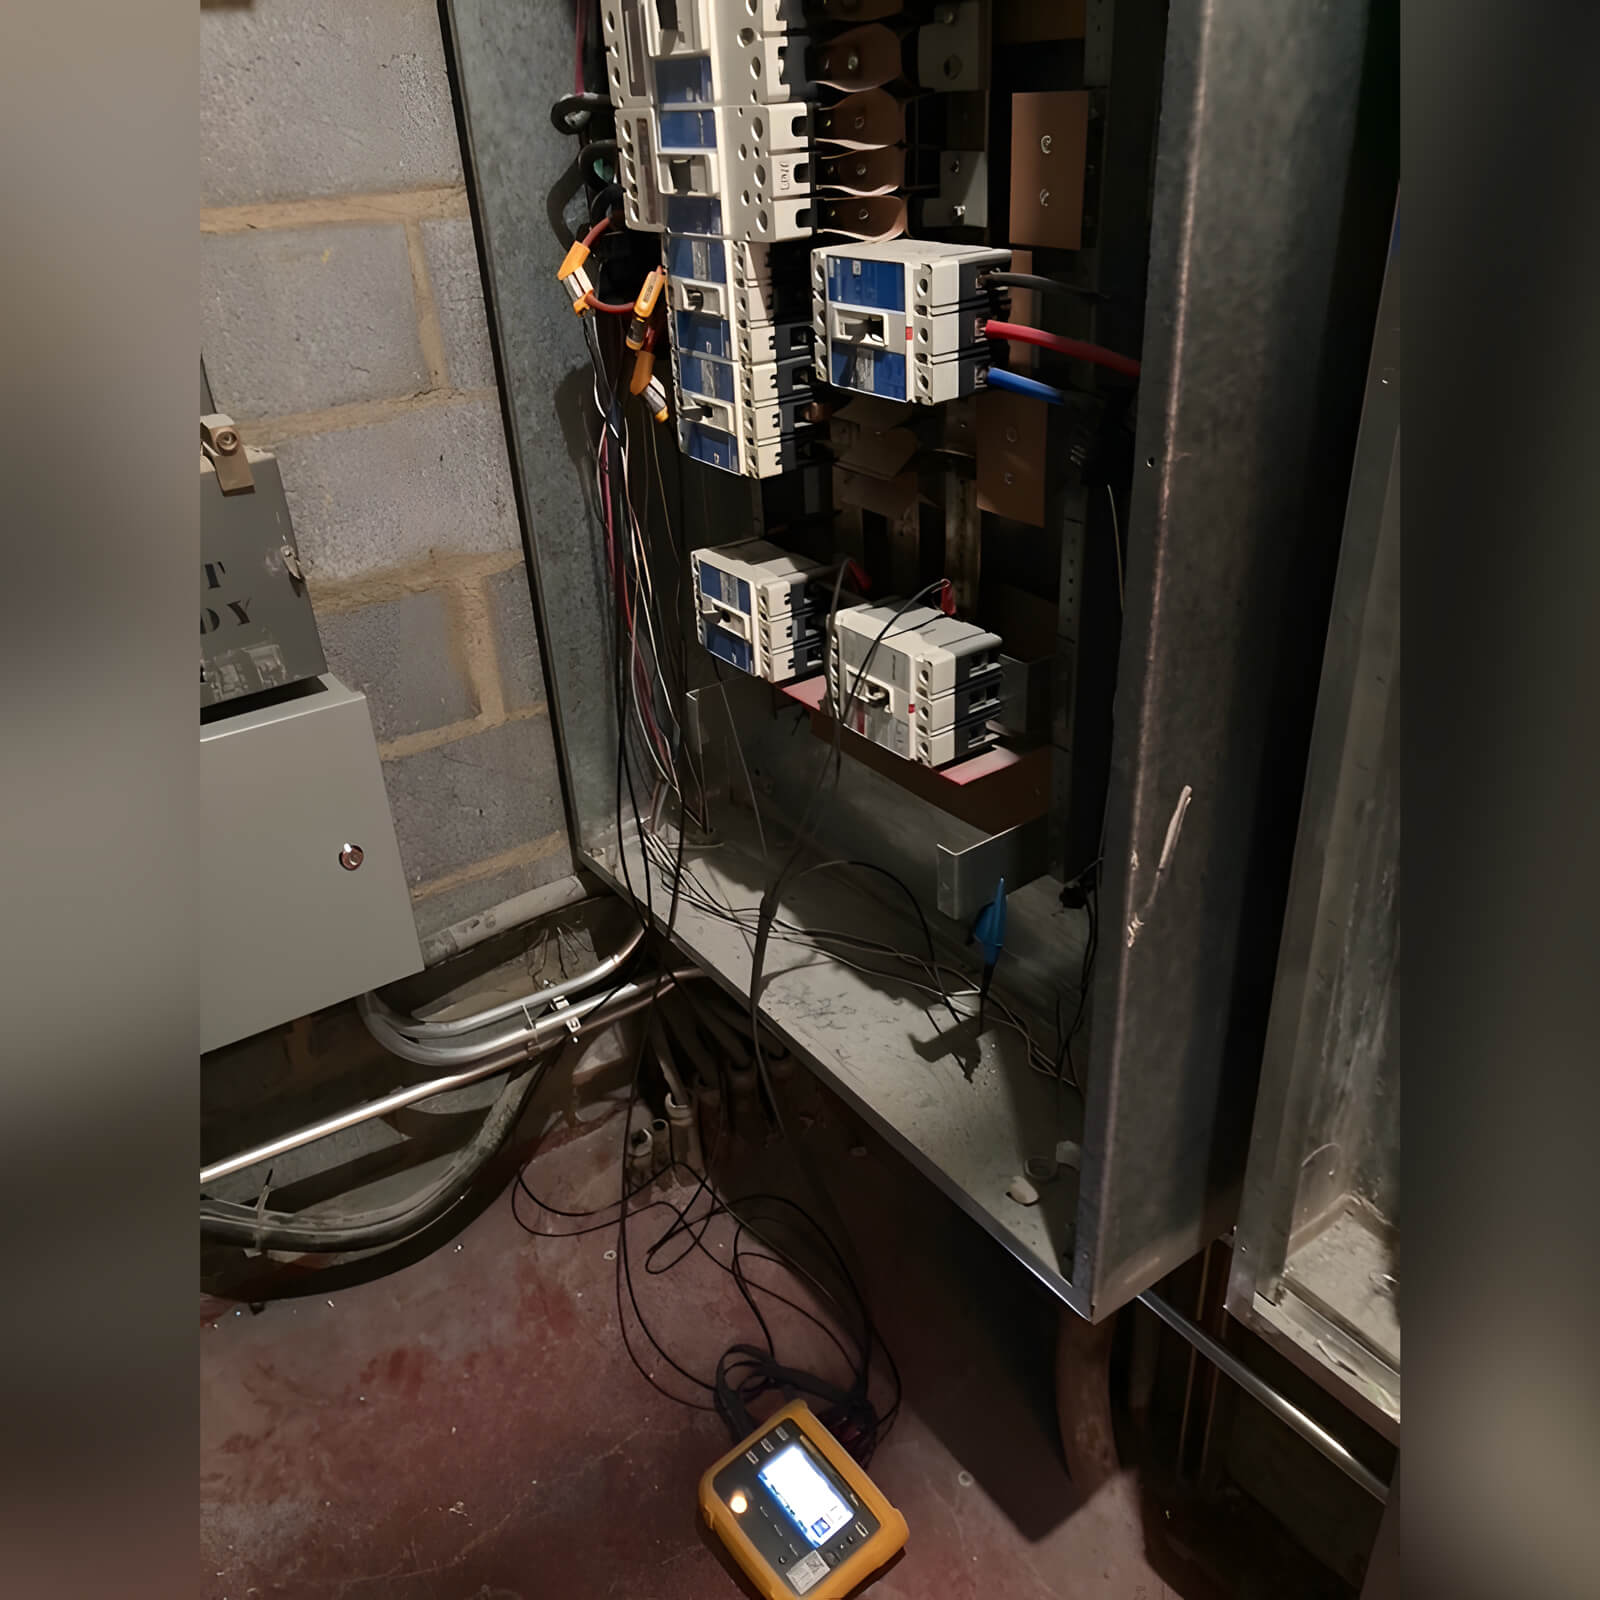 Fluke energy logger connected to electric panel meters